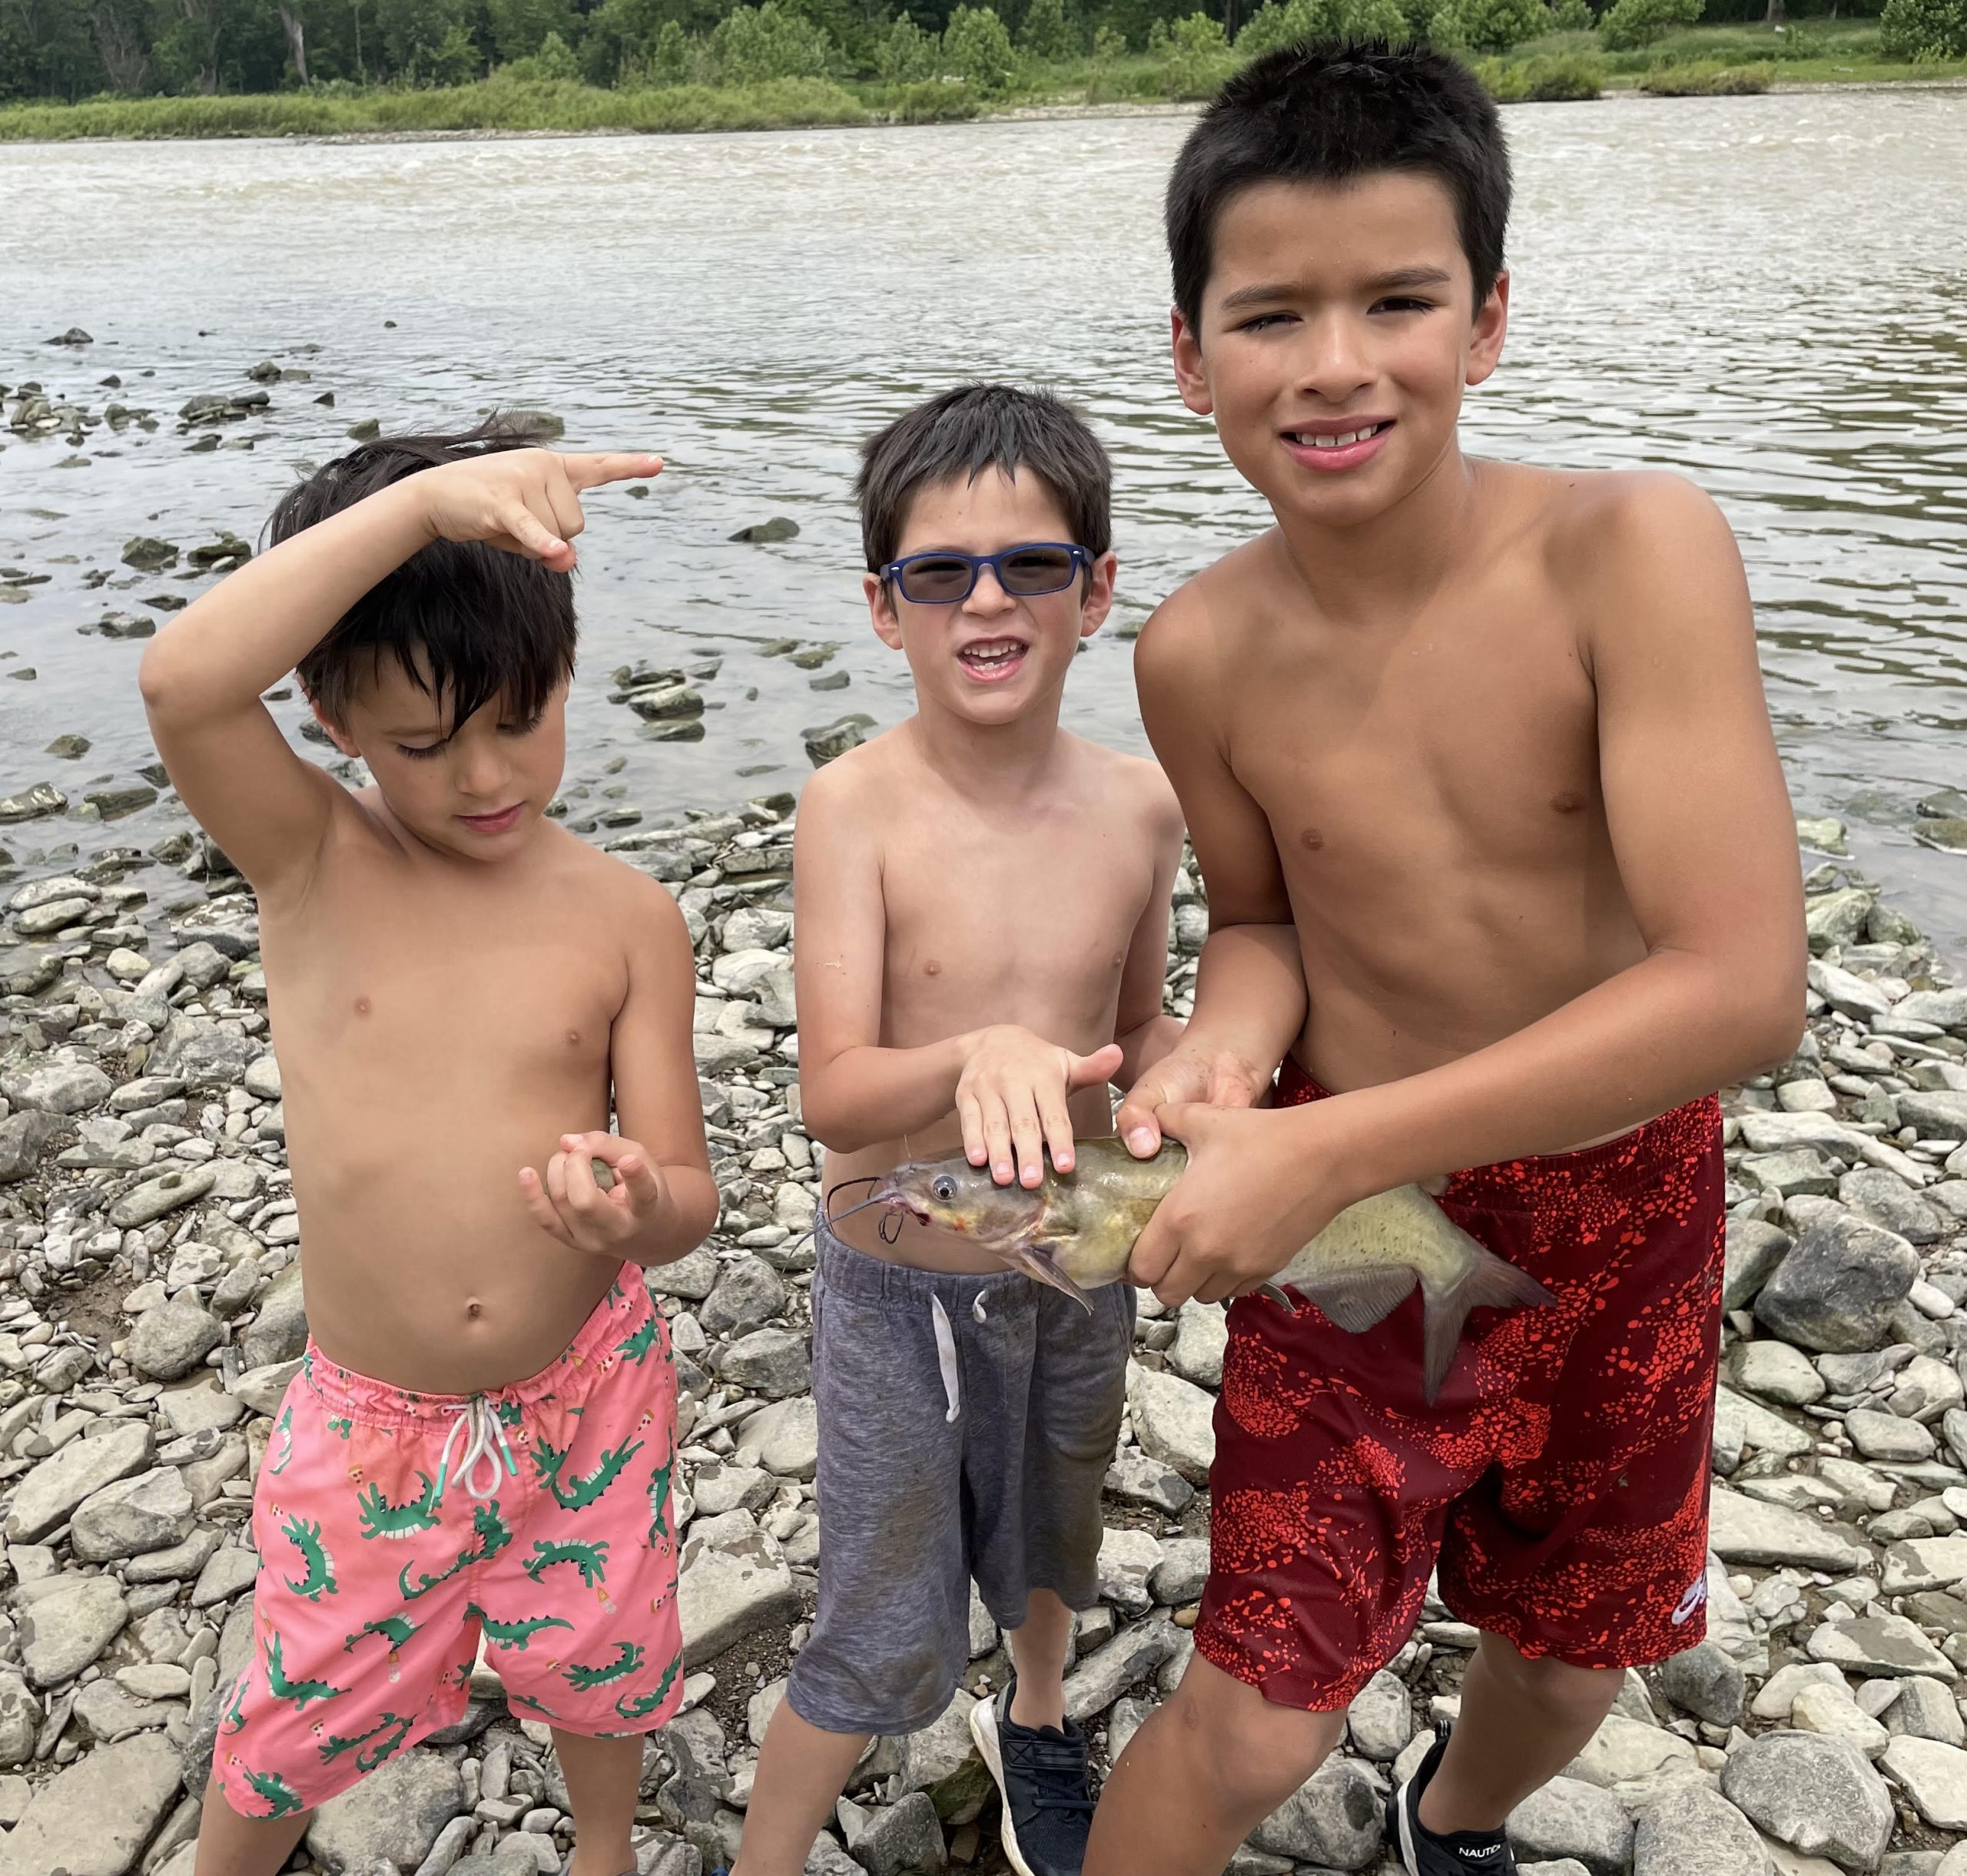 Maumee river report–7 june 22